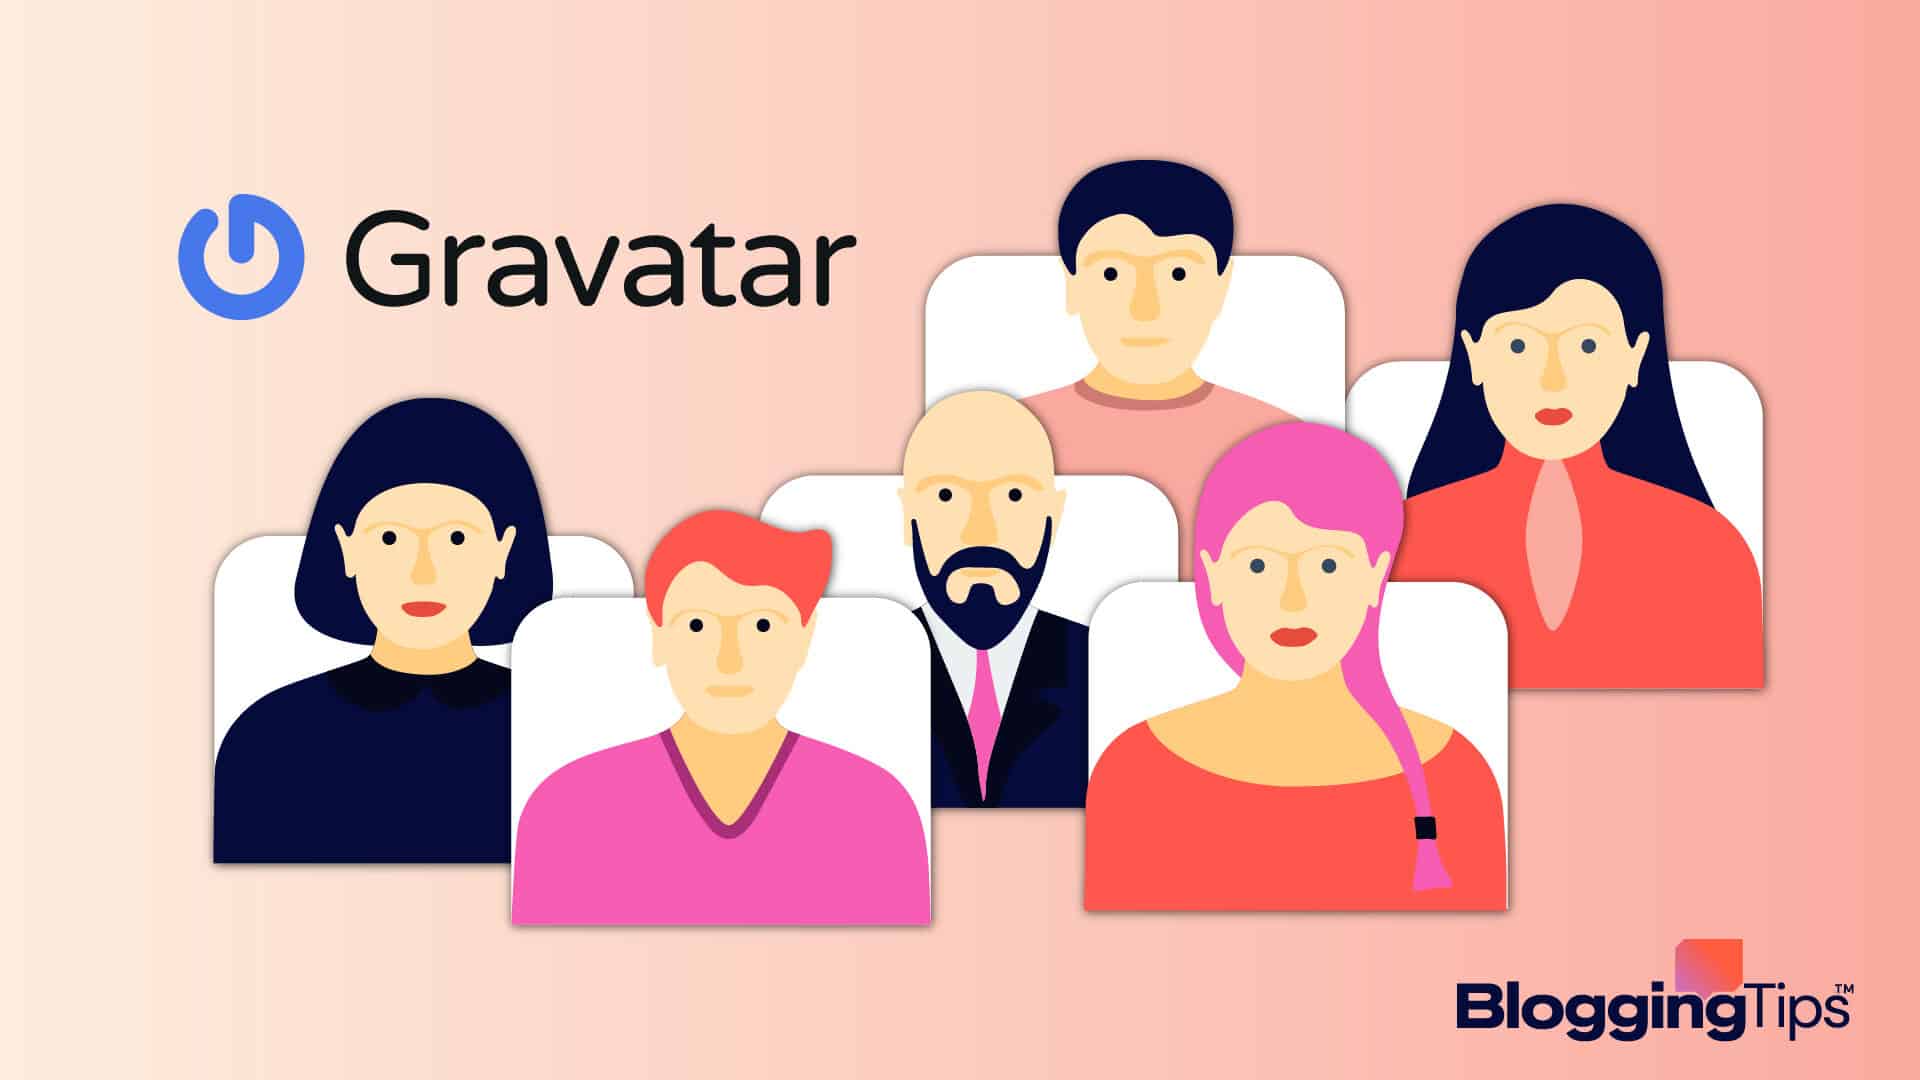 vector graphic showing an illustration of people learning about gravatar